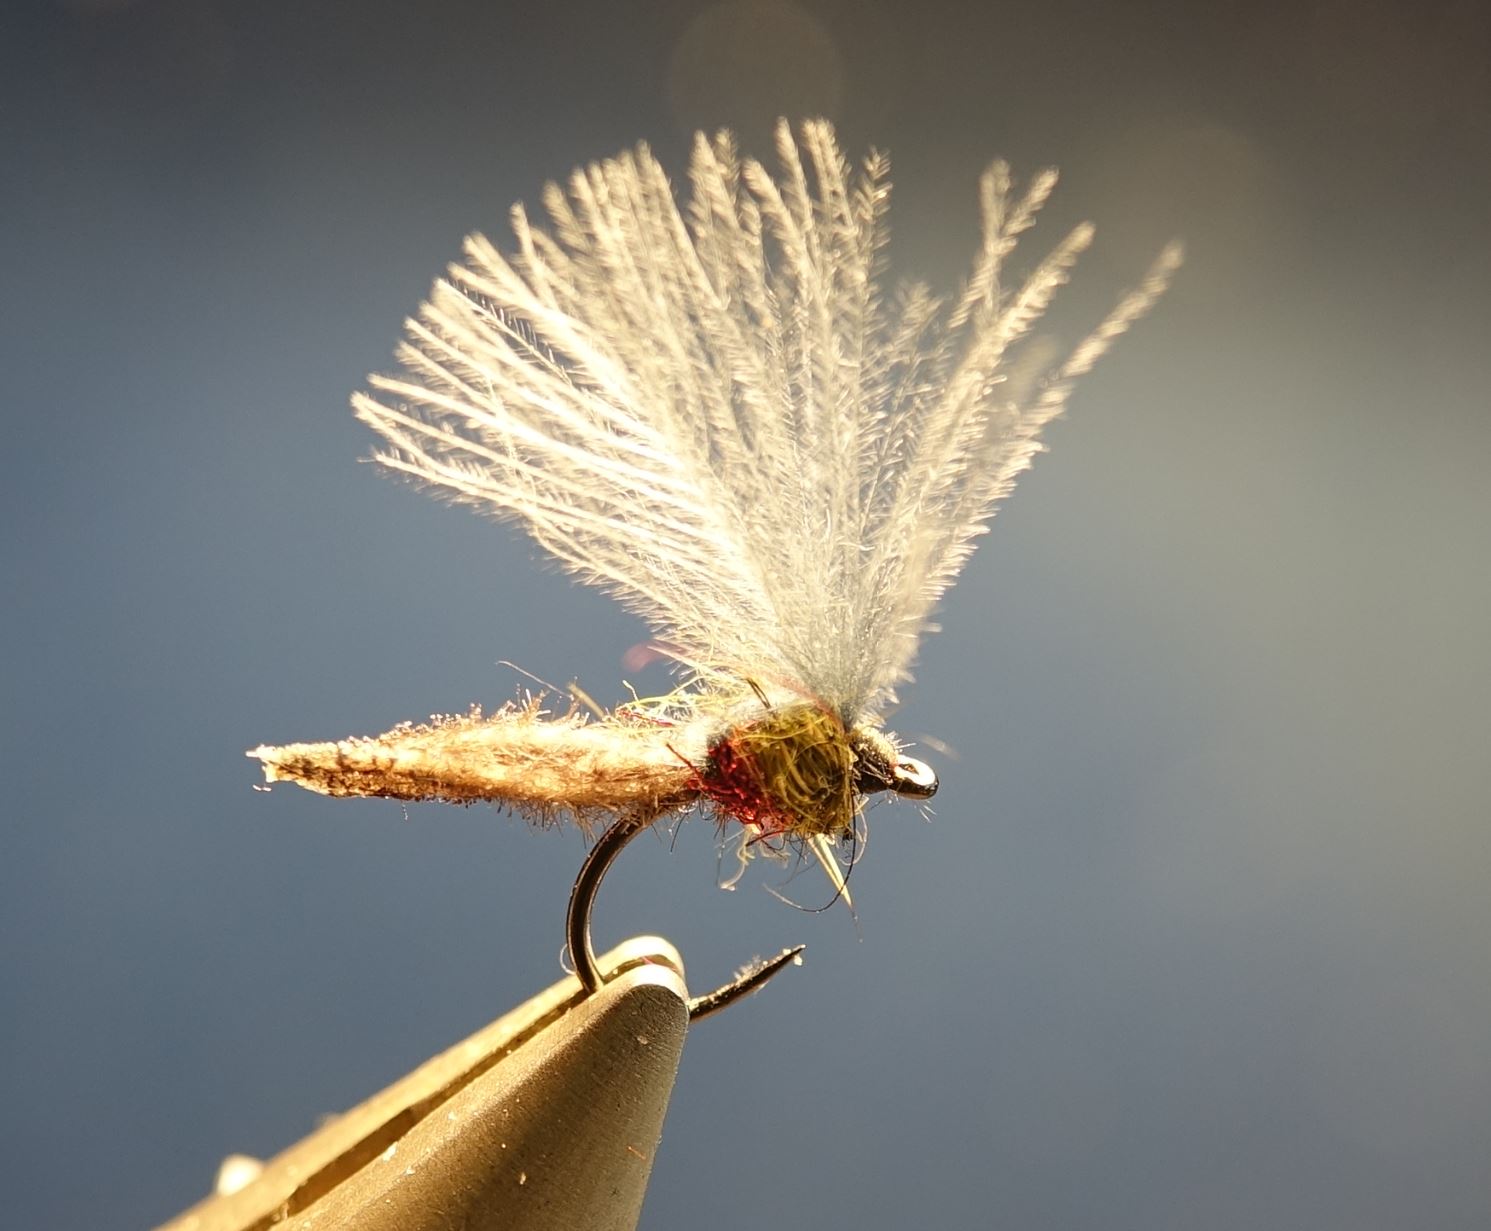 Chironome microchenille CDC dubbing mouche fly tying eclosion tip